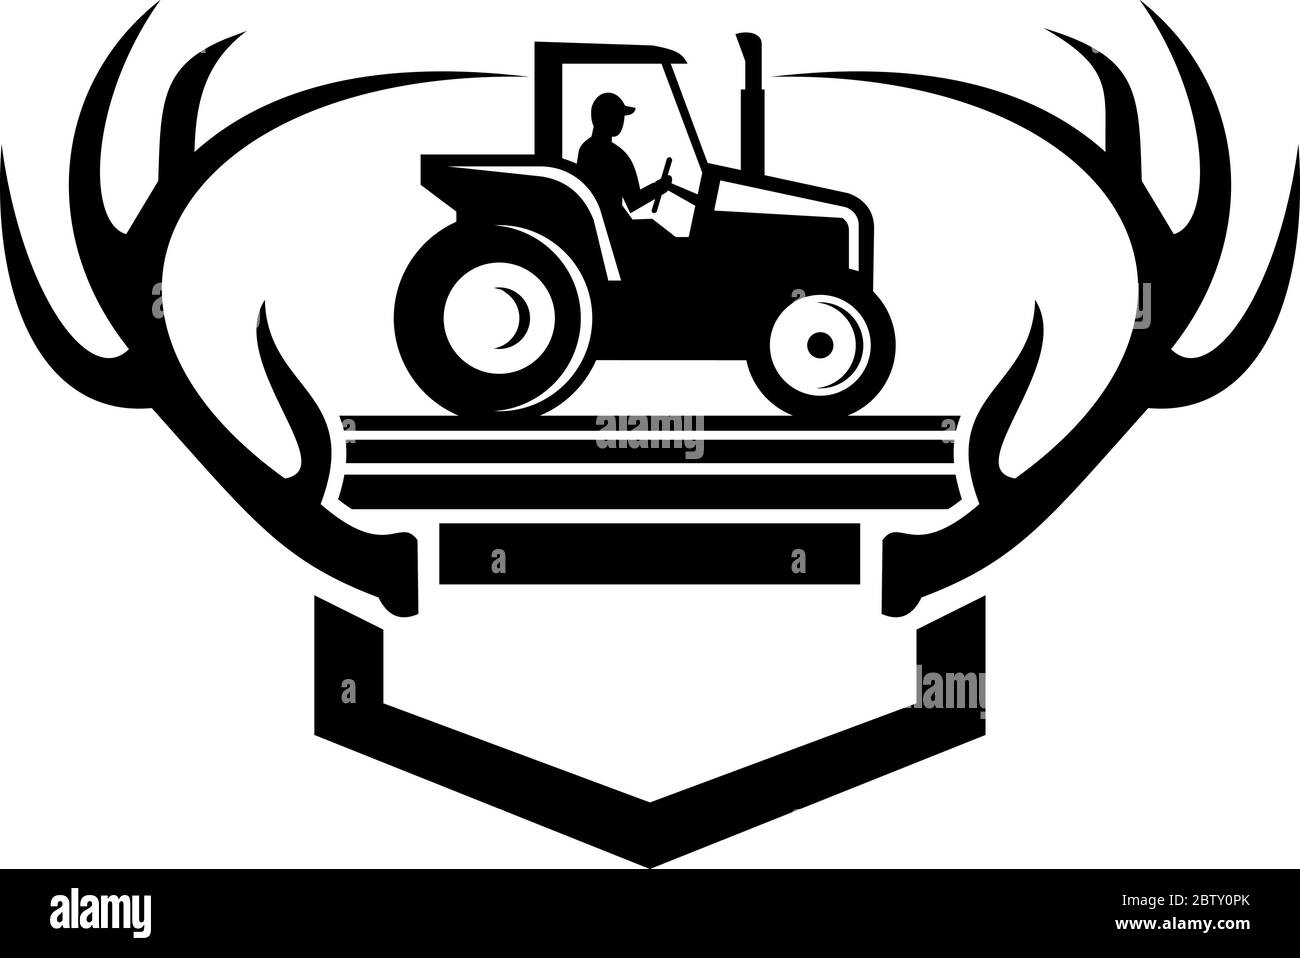 Retro style illustration of a White Tail Deer Antler framing a farmer driving a vintage farm Tractor viewed from side on isolated background done in r Stock Vector